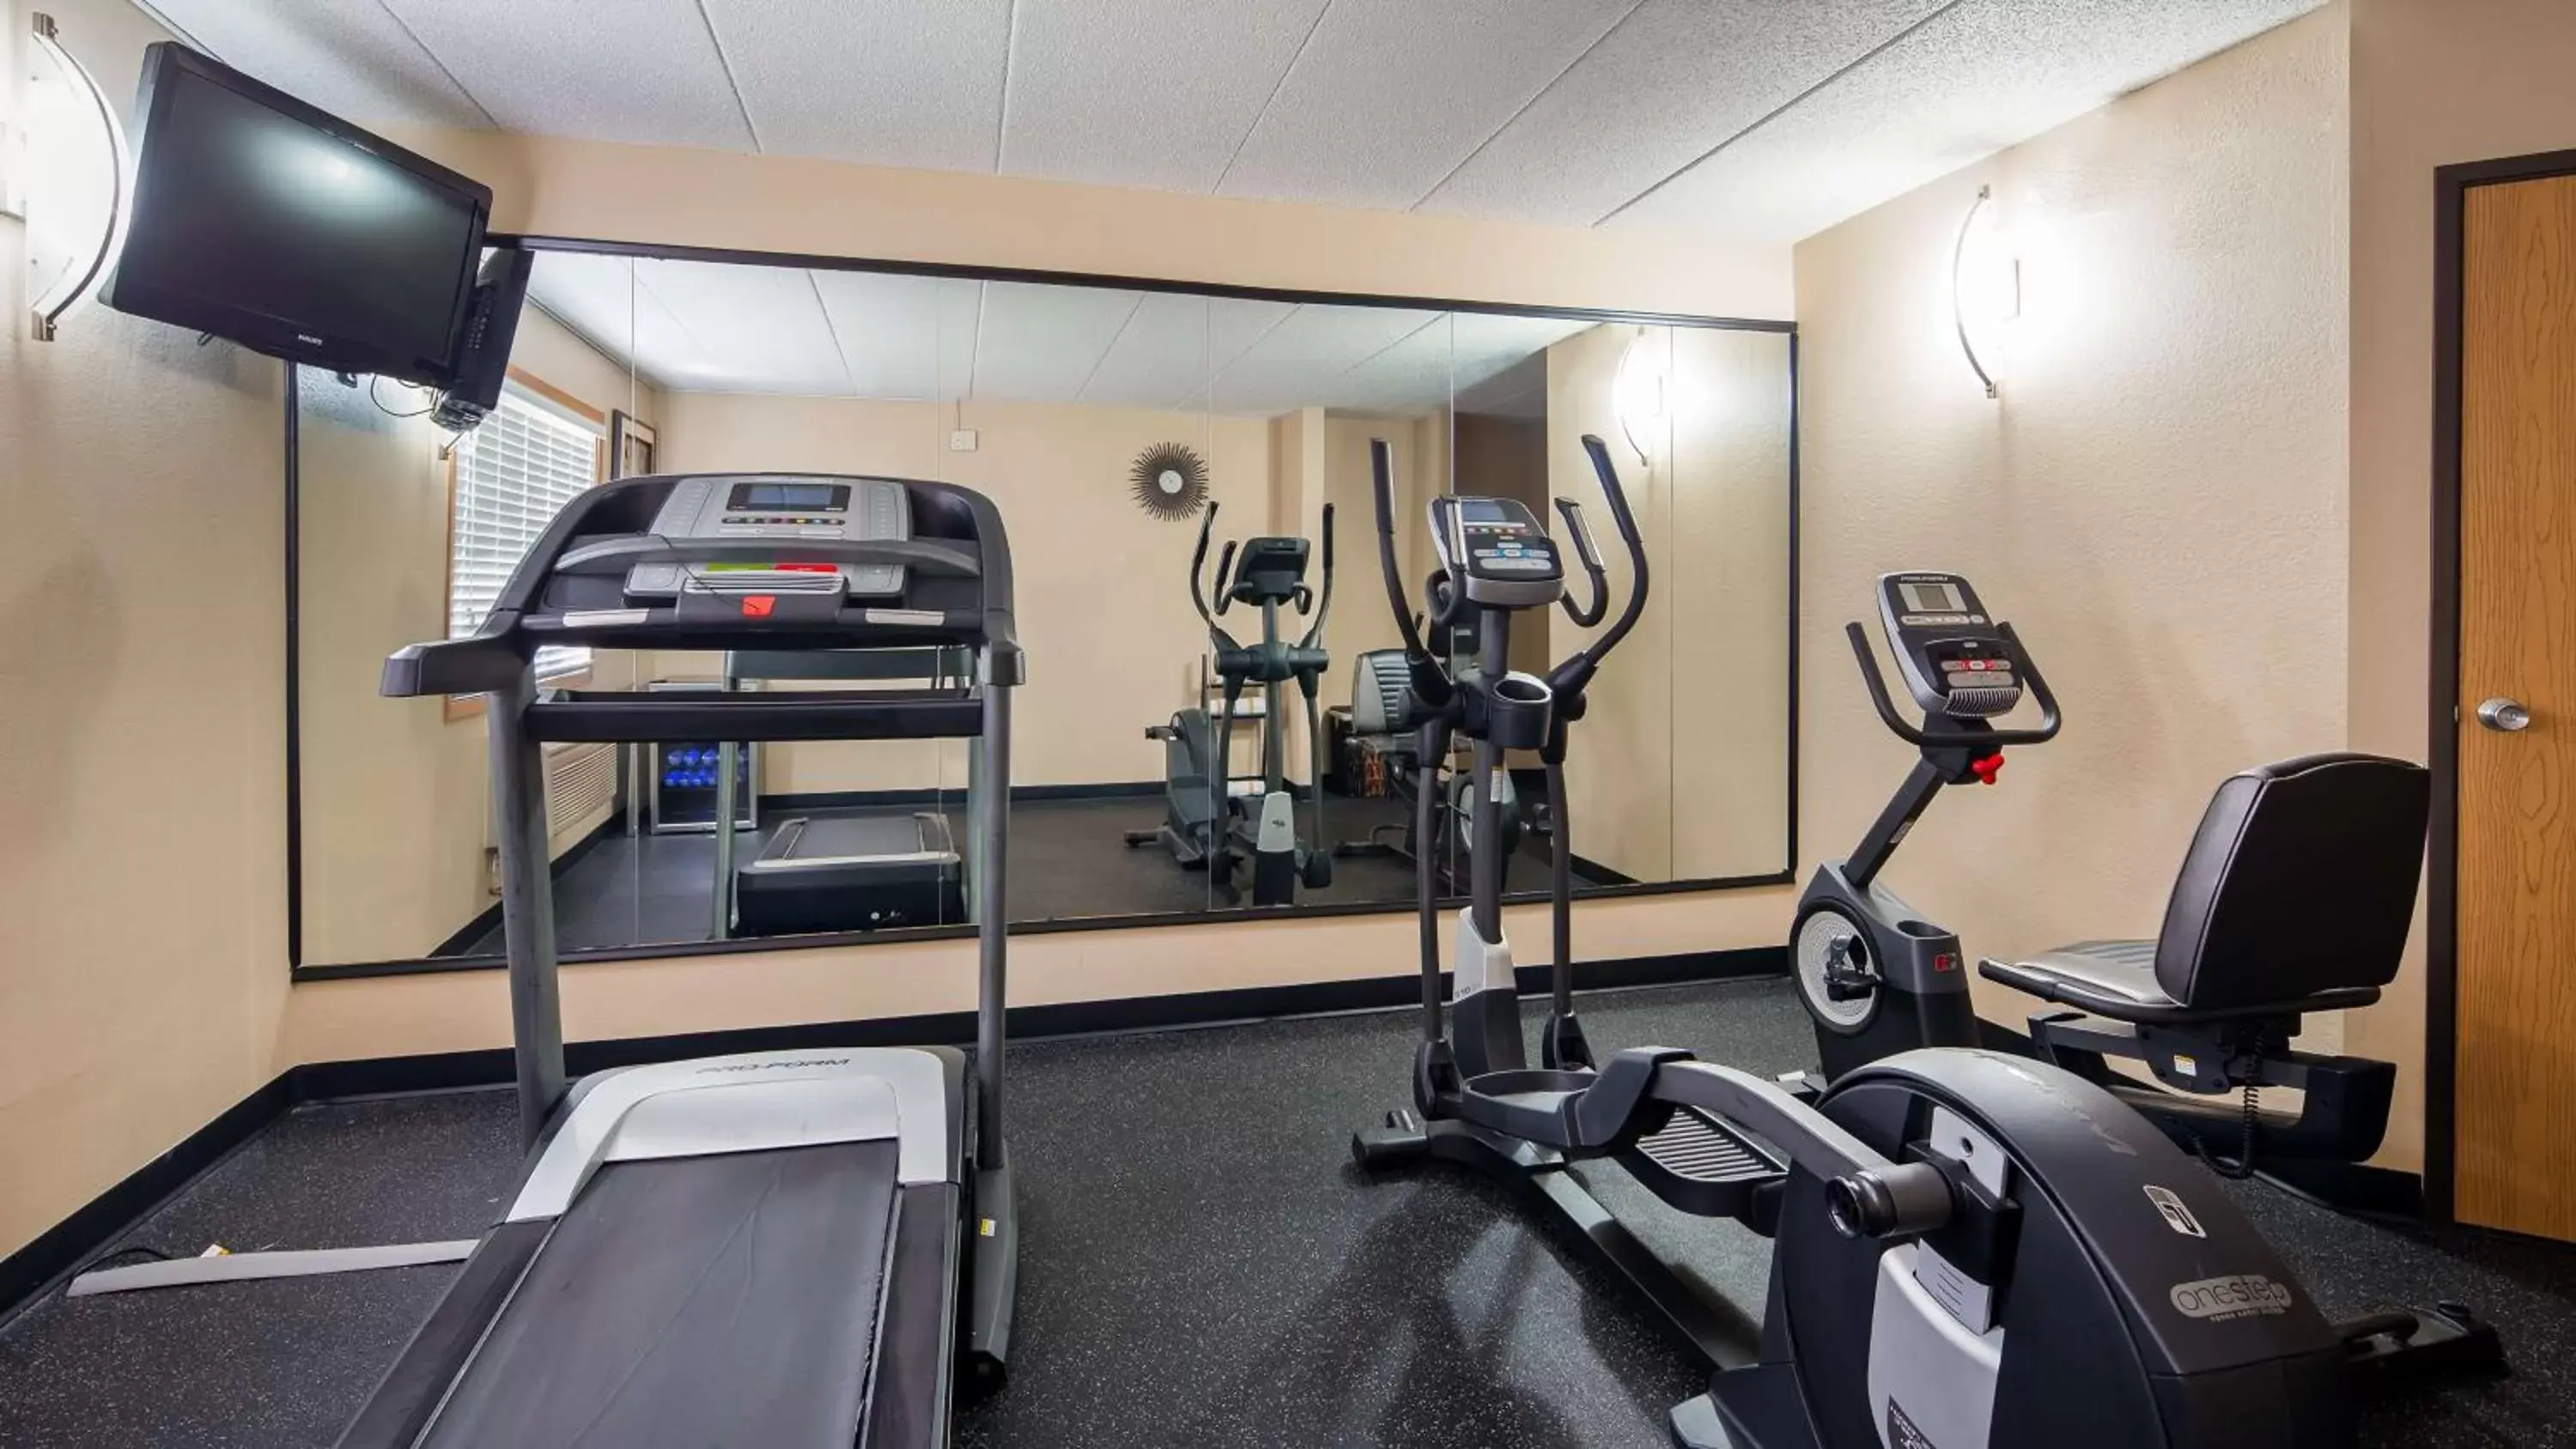 Fitness centre/facilities, Fitness Center/Facilities in Best Western Germantown Inn